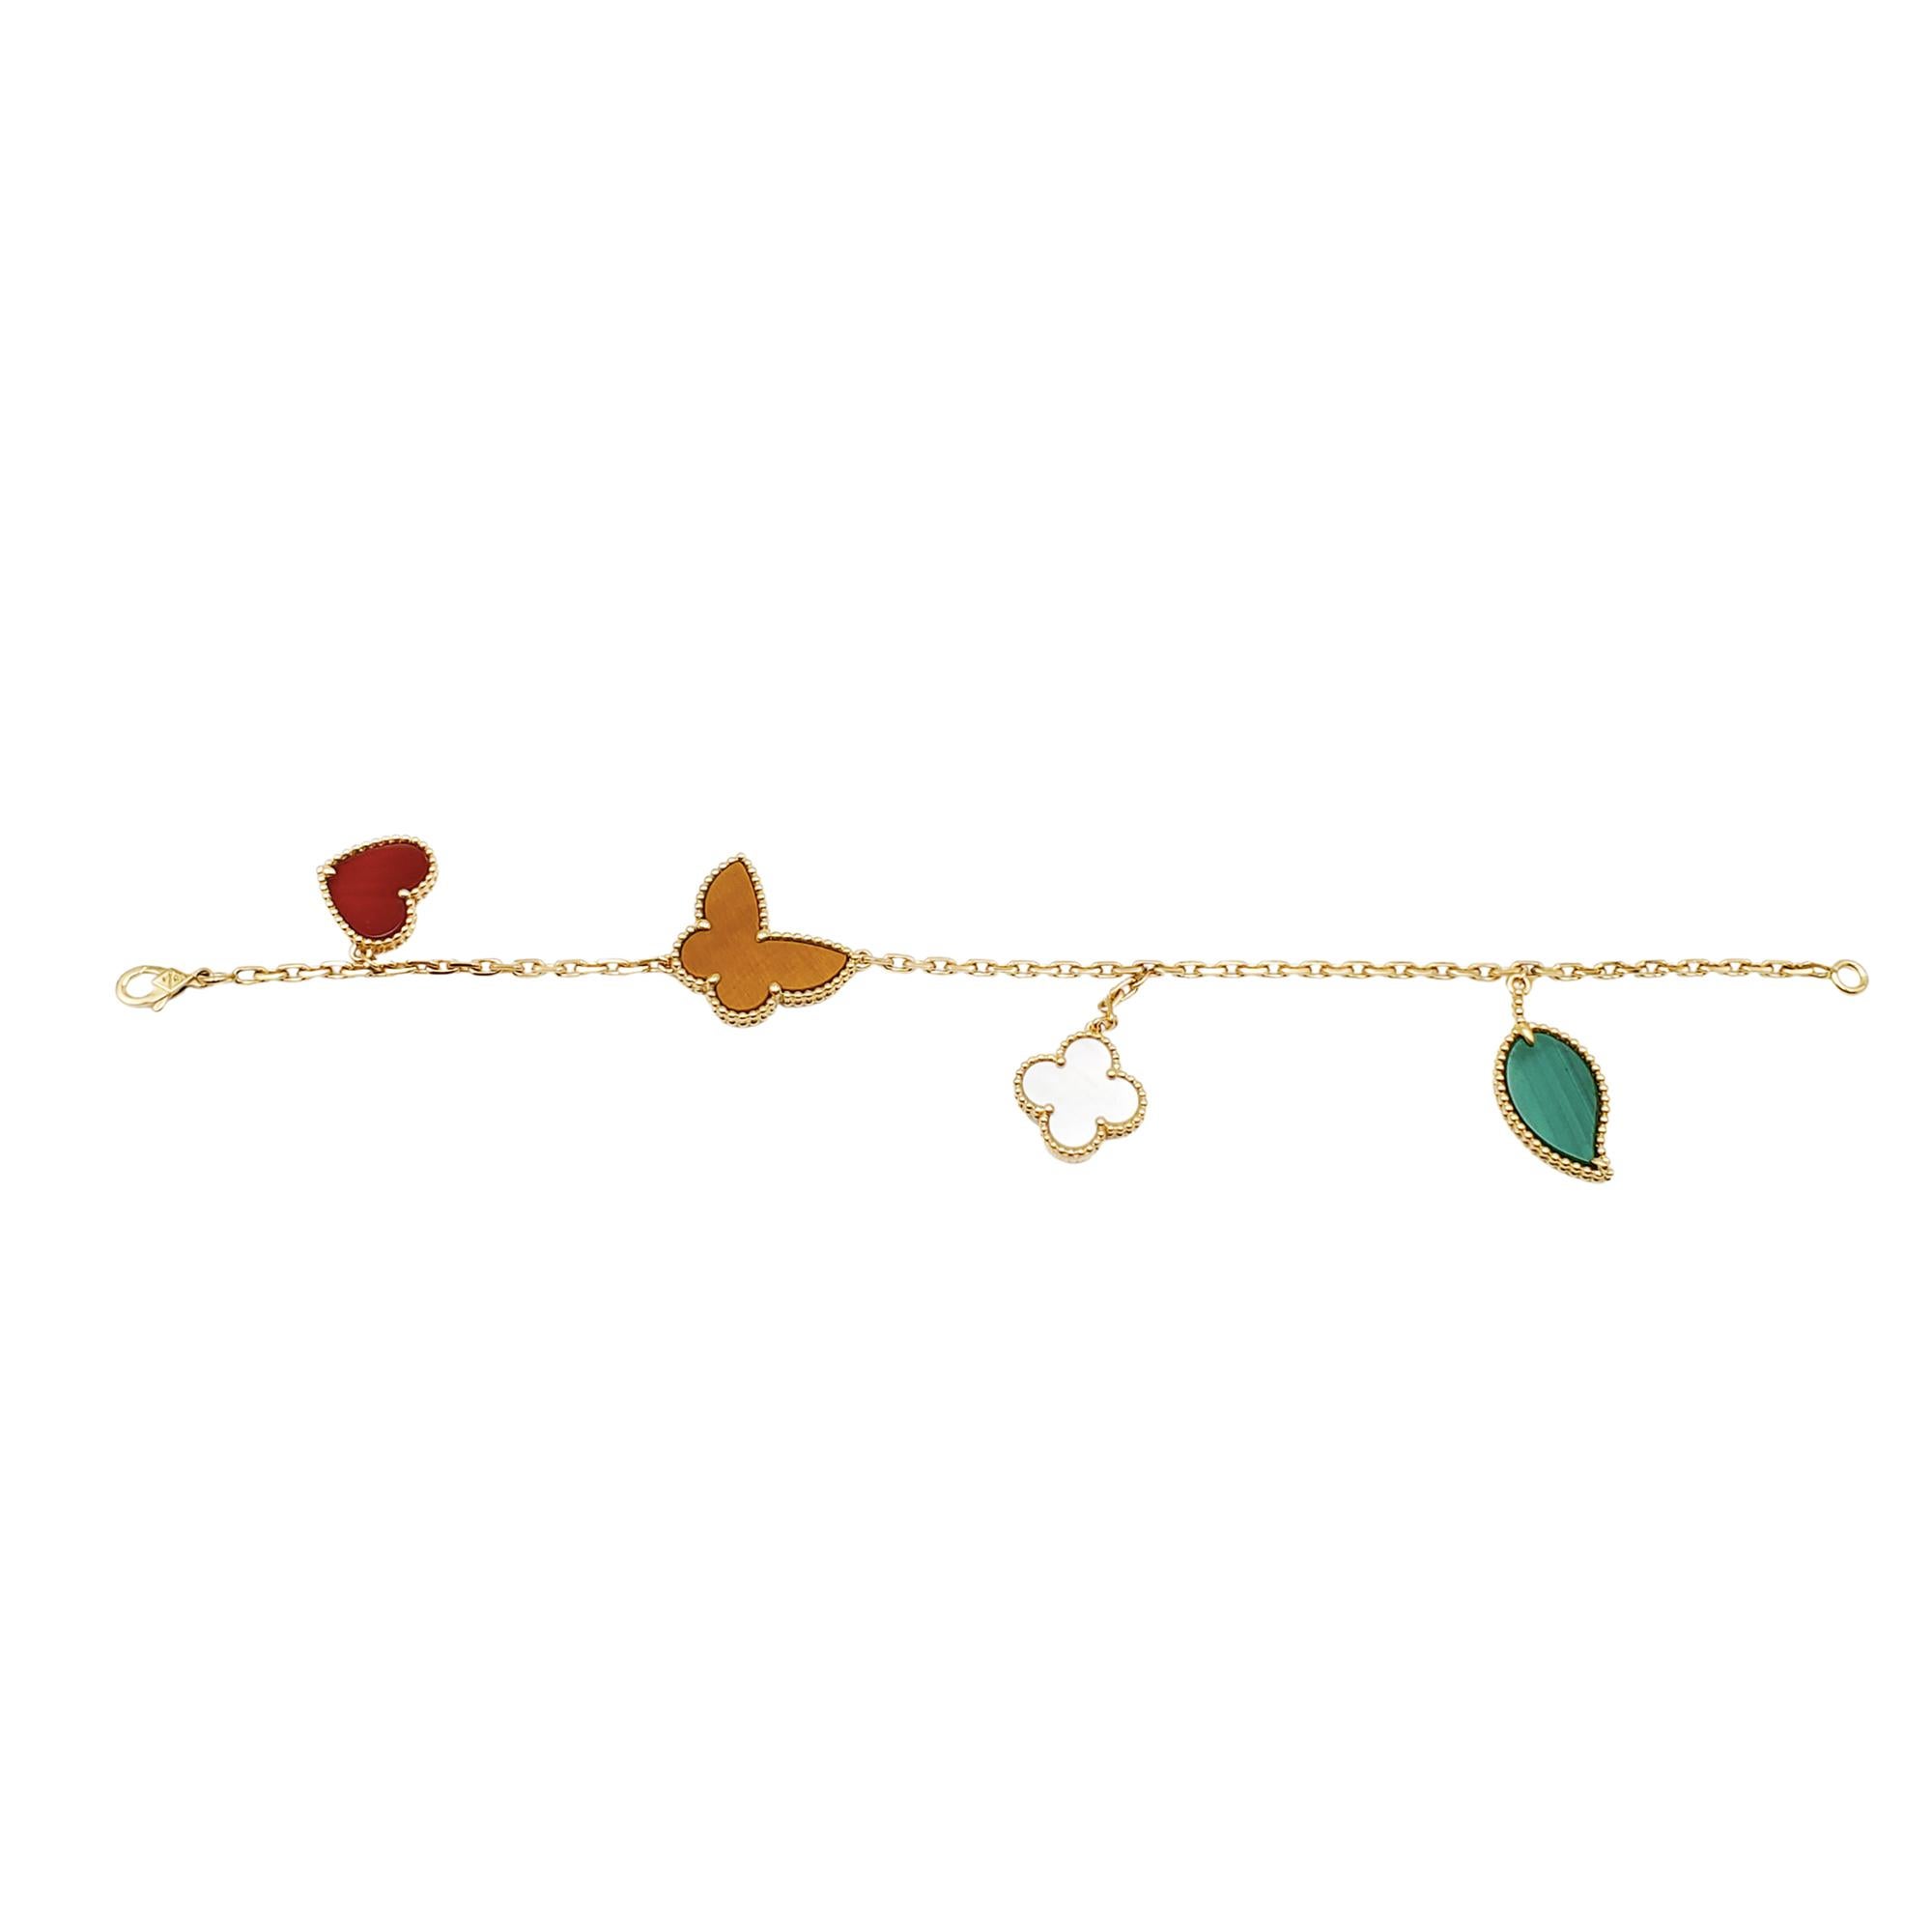 Authentic Van Cleef & Arpels Lucky Alhambra bracelet crafted in 18 karat yellow gold. The four motif bracelet features some of the brand's most iconic symbols: a malachite leaf, a mother-of-pearl clover motif, a tiger's eye butterfly, and a